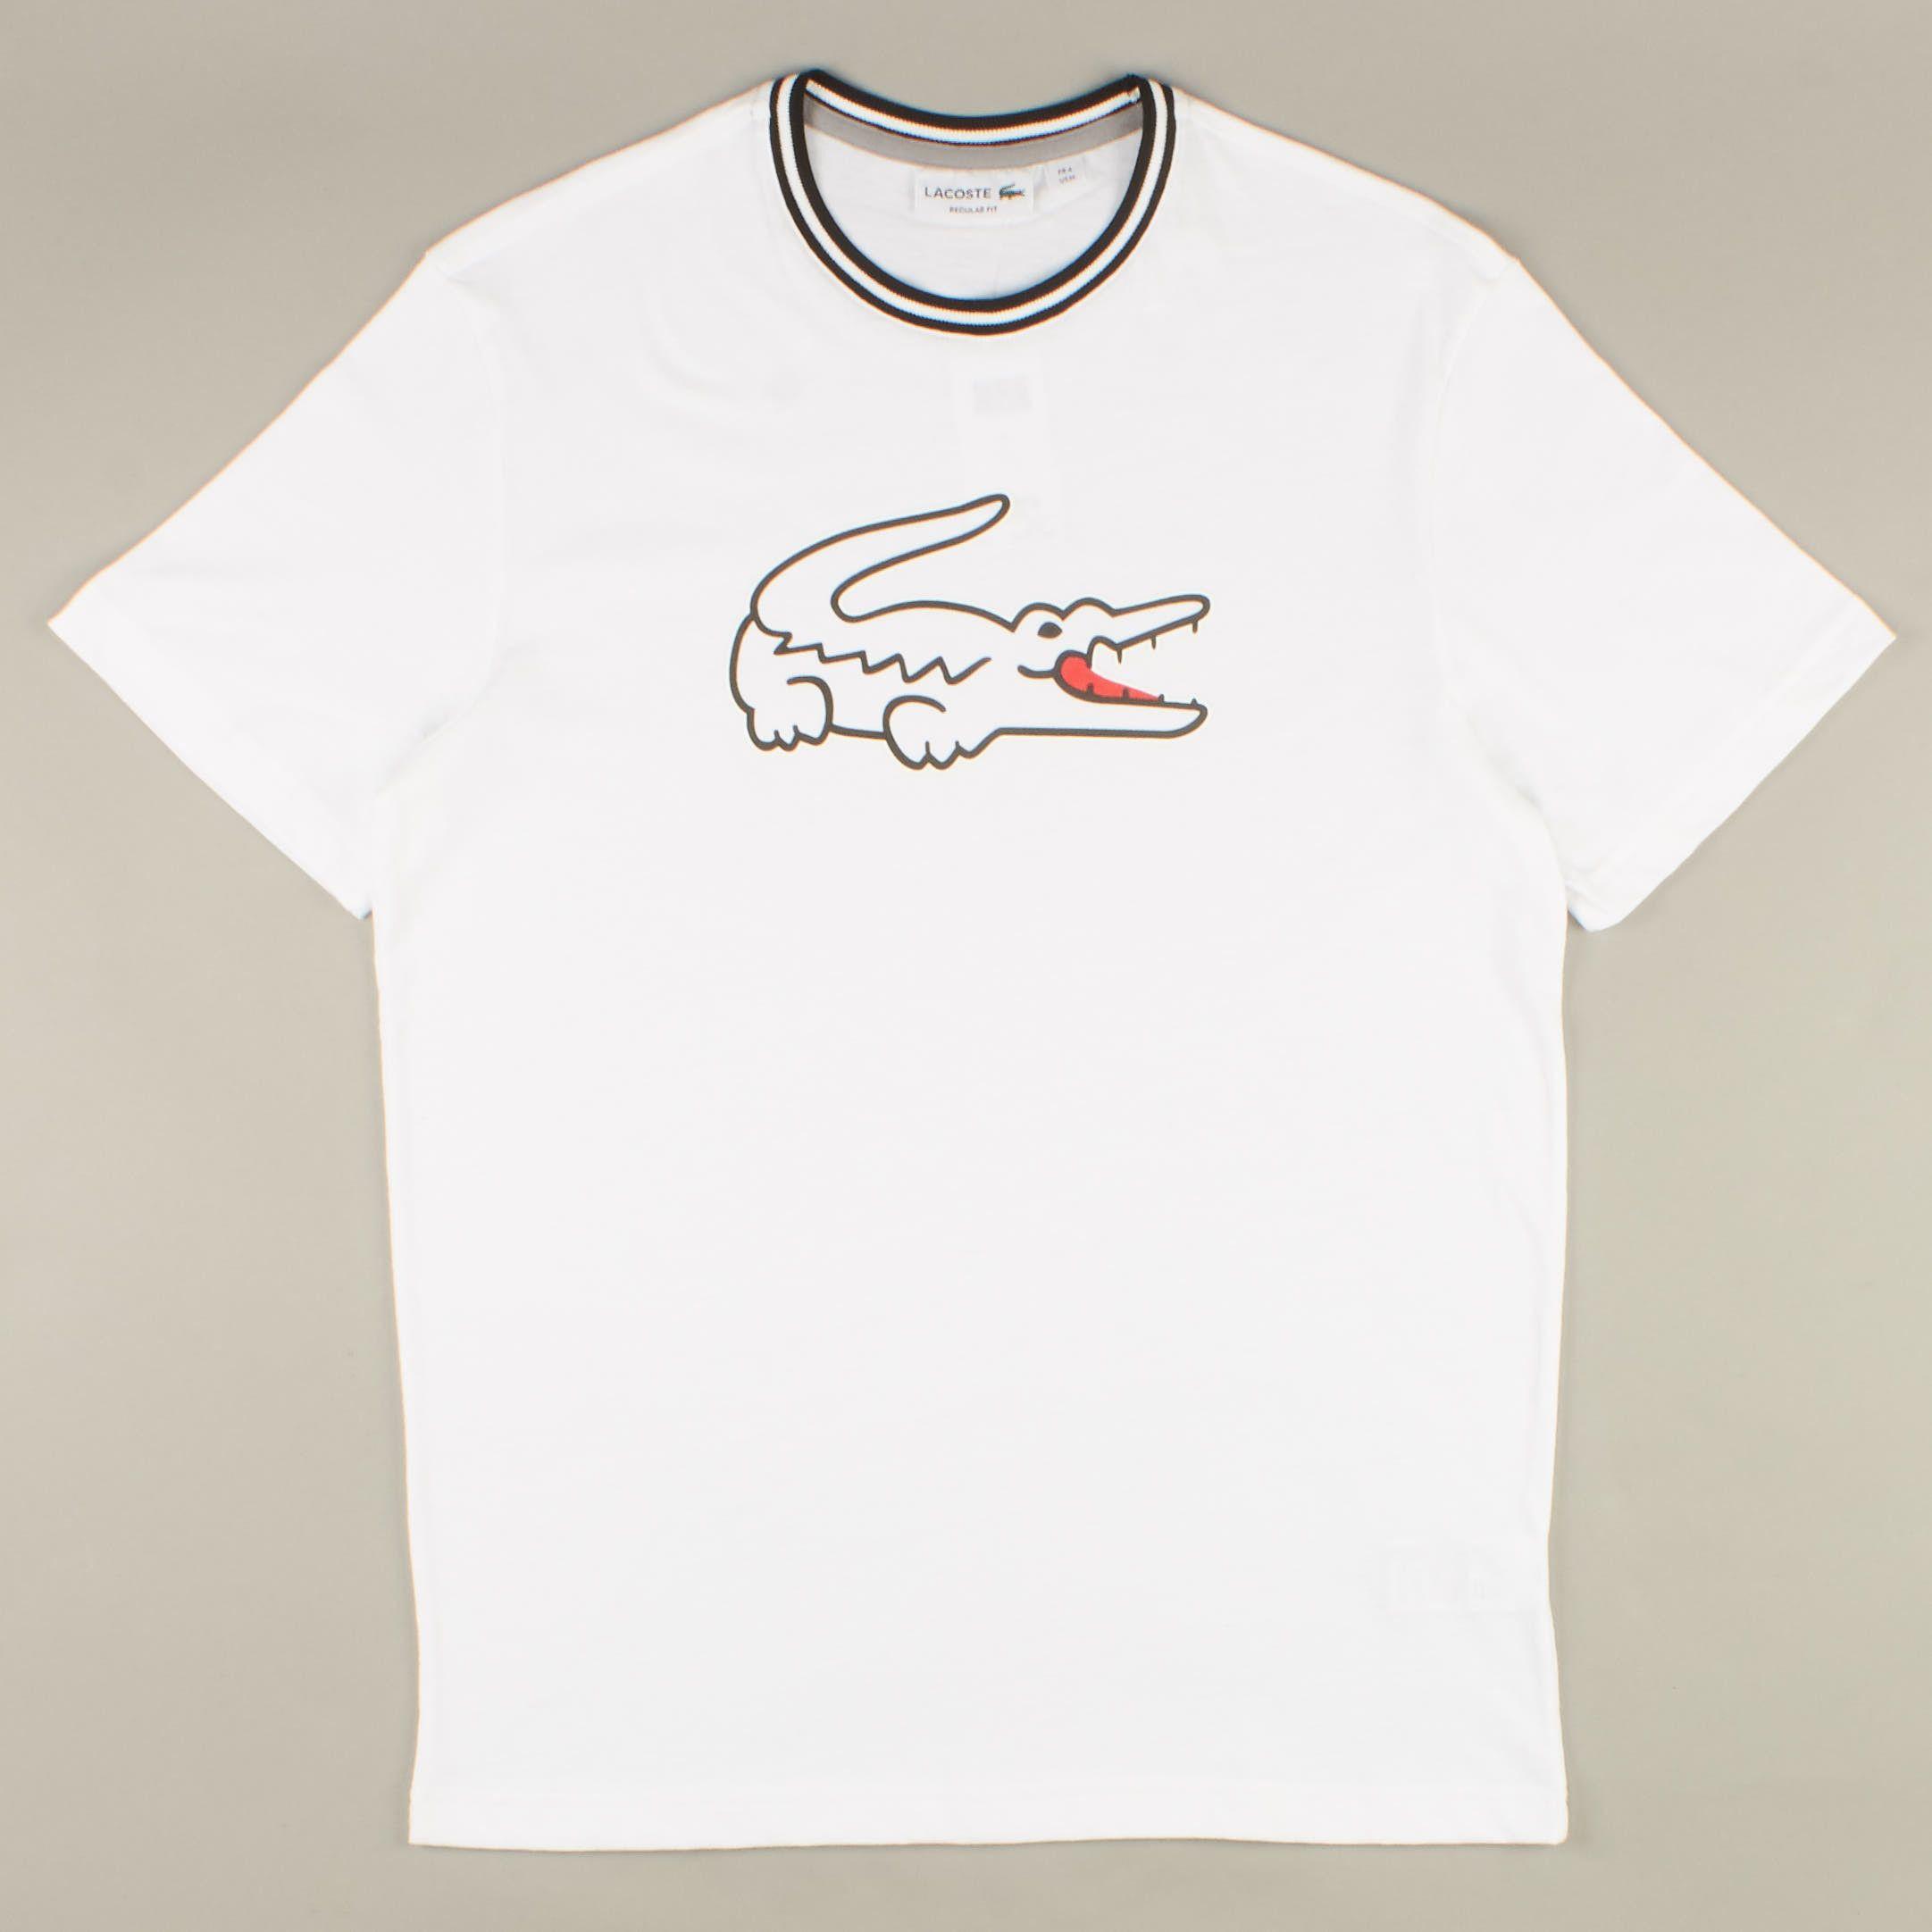 Lacoste Shirt Logo - Lacoste T-Shirt Logo White - Available in Le Fix Denmark